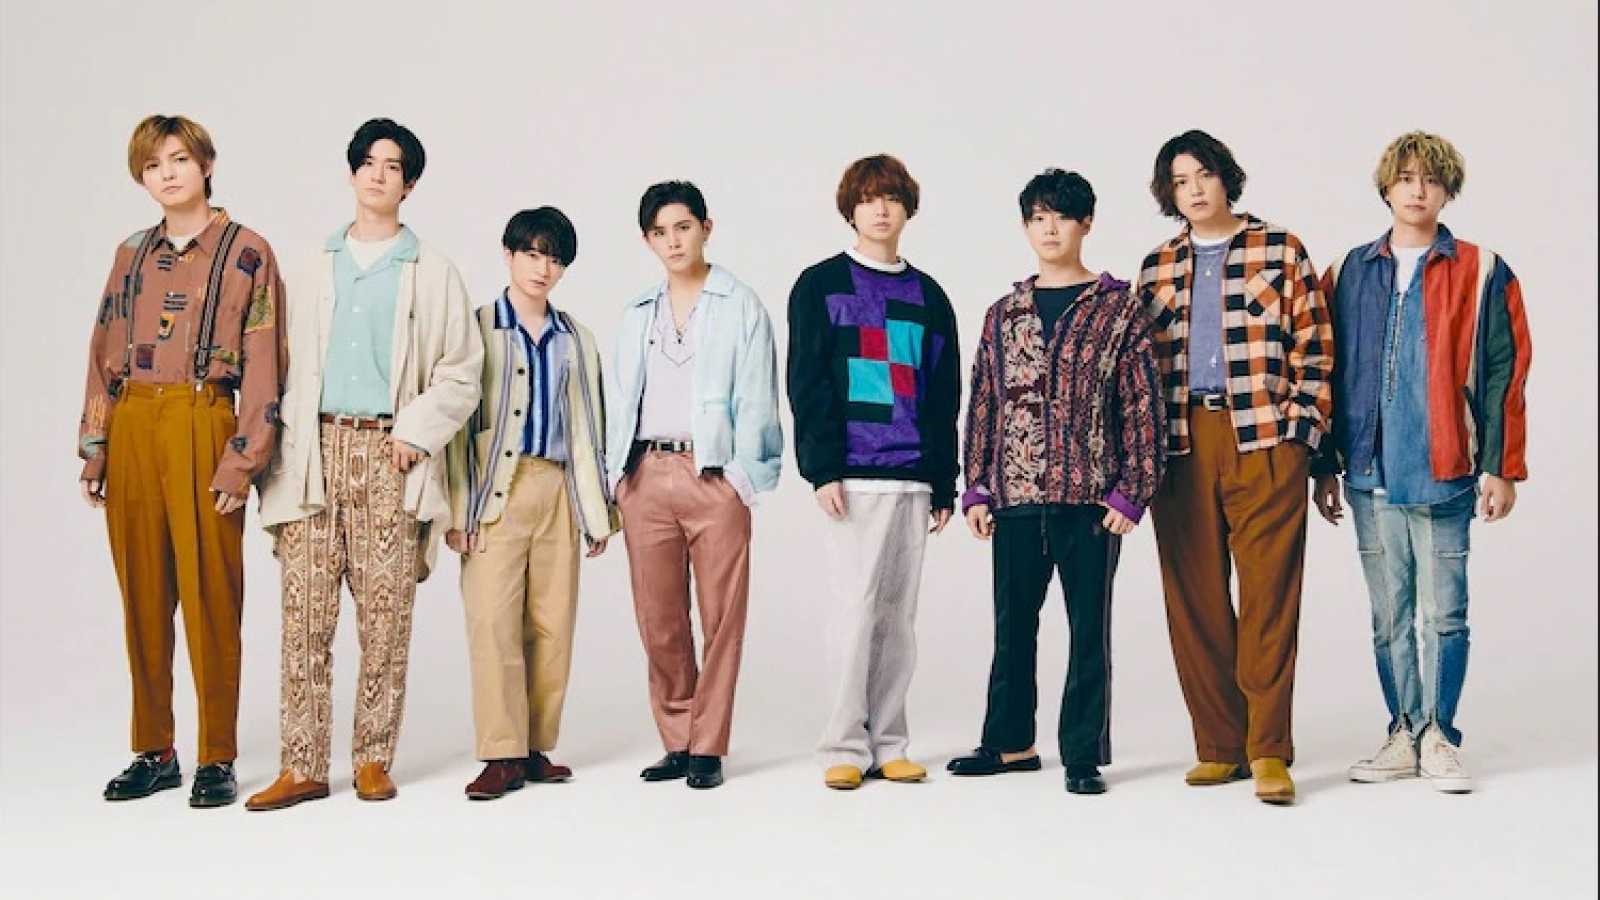 New Album from Hey! Say! JUMP © Hey! Say! JUMP. All rights reserved.